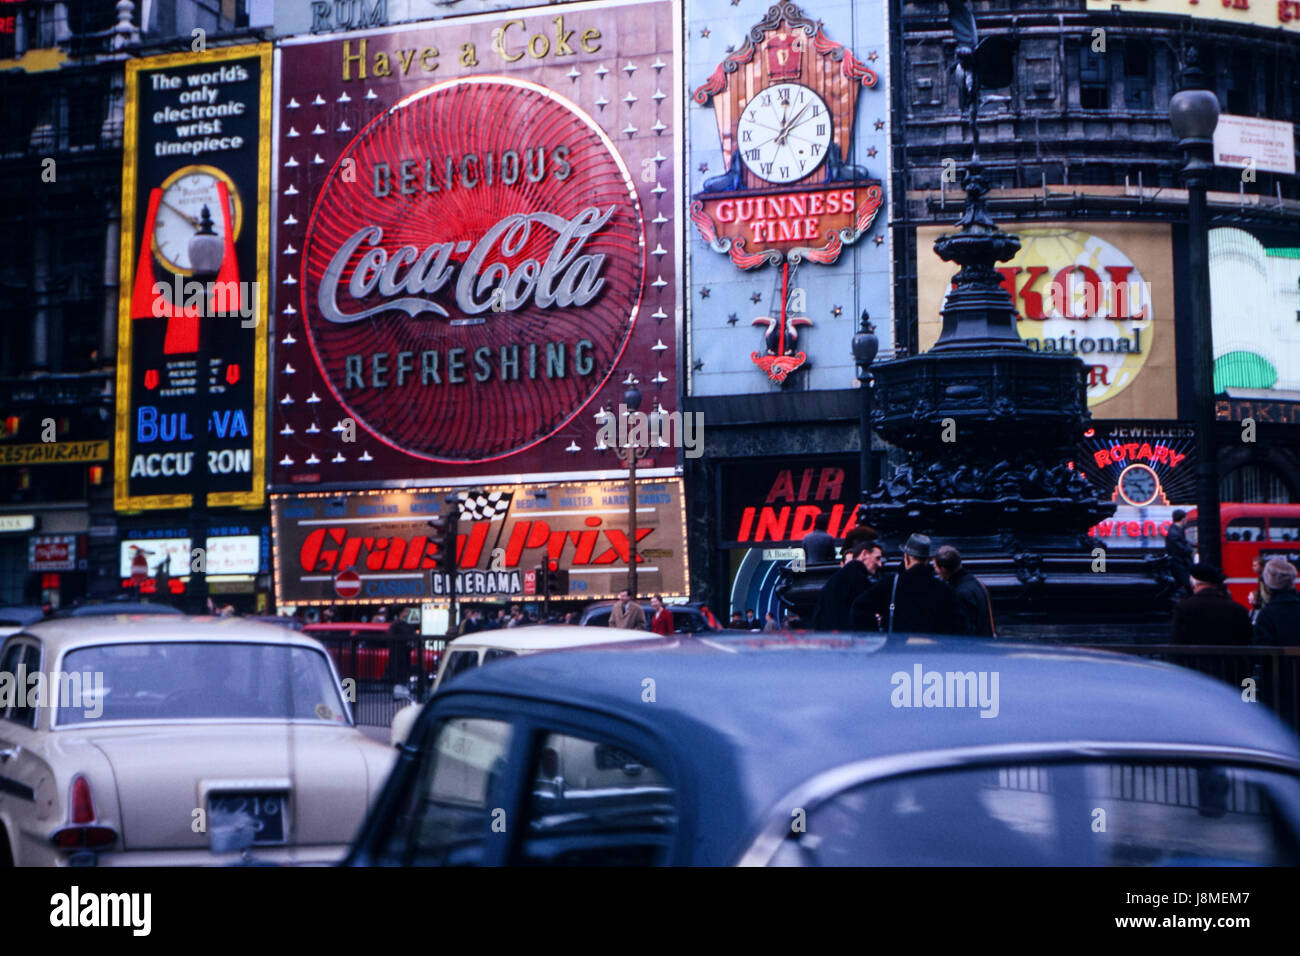 Vintage image of Piccadilly Circus in London taken in April 1967 showing various billboards of the time including Coca Cola, Guiness, Skol Stock Photo